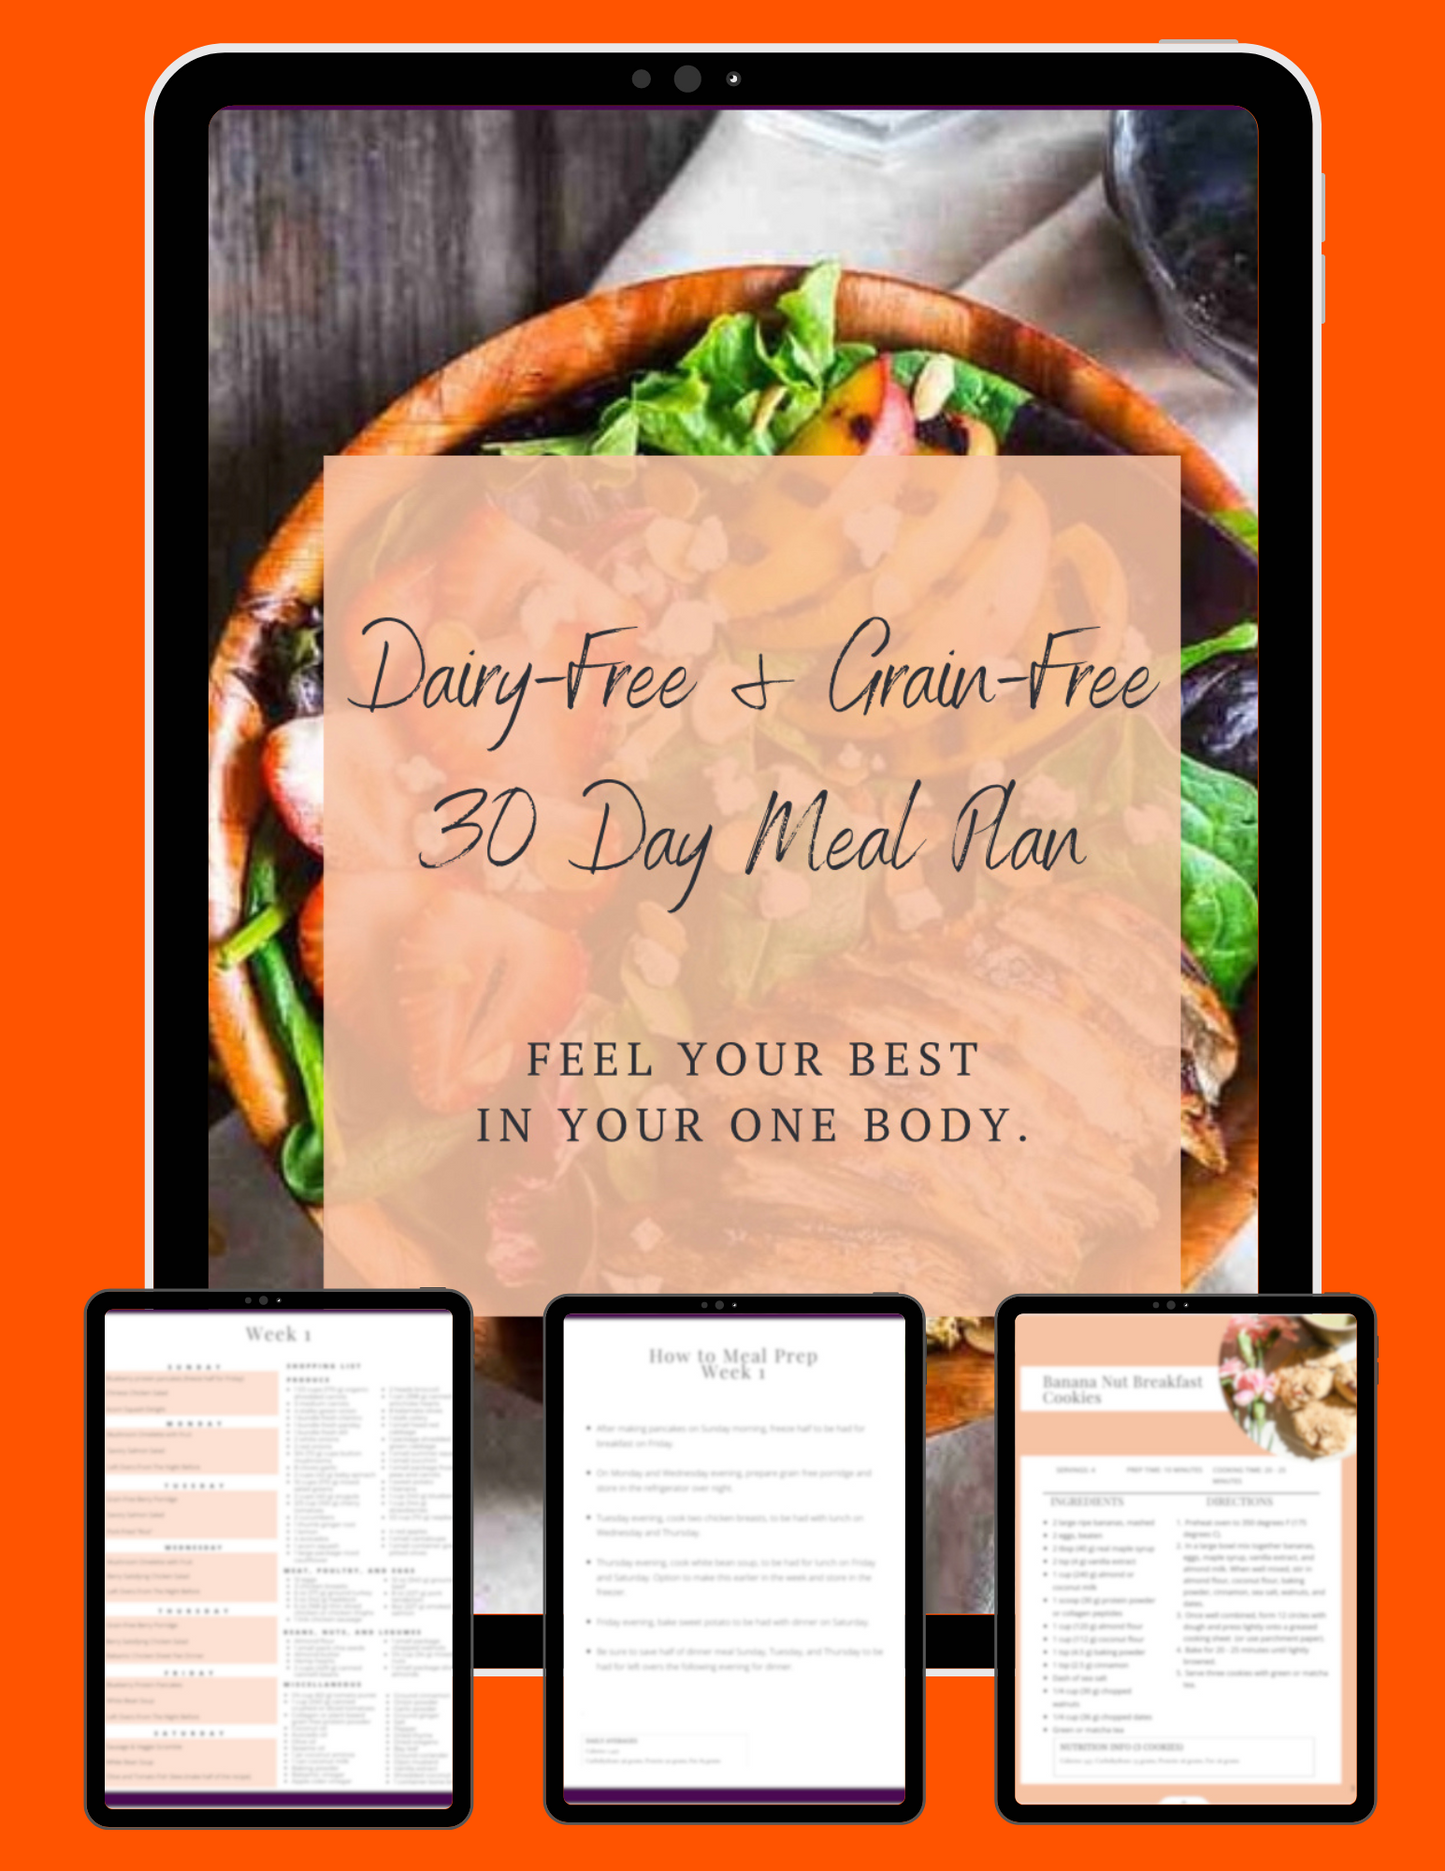 Dairy + Grain Free 30 Day Meal Plan